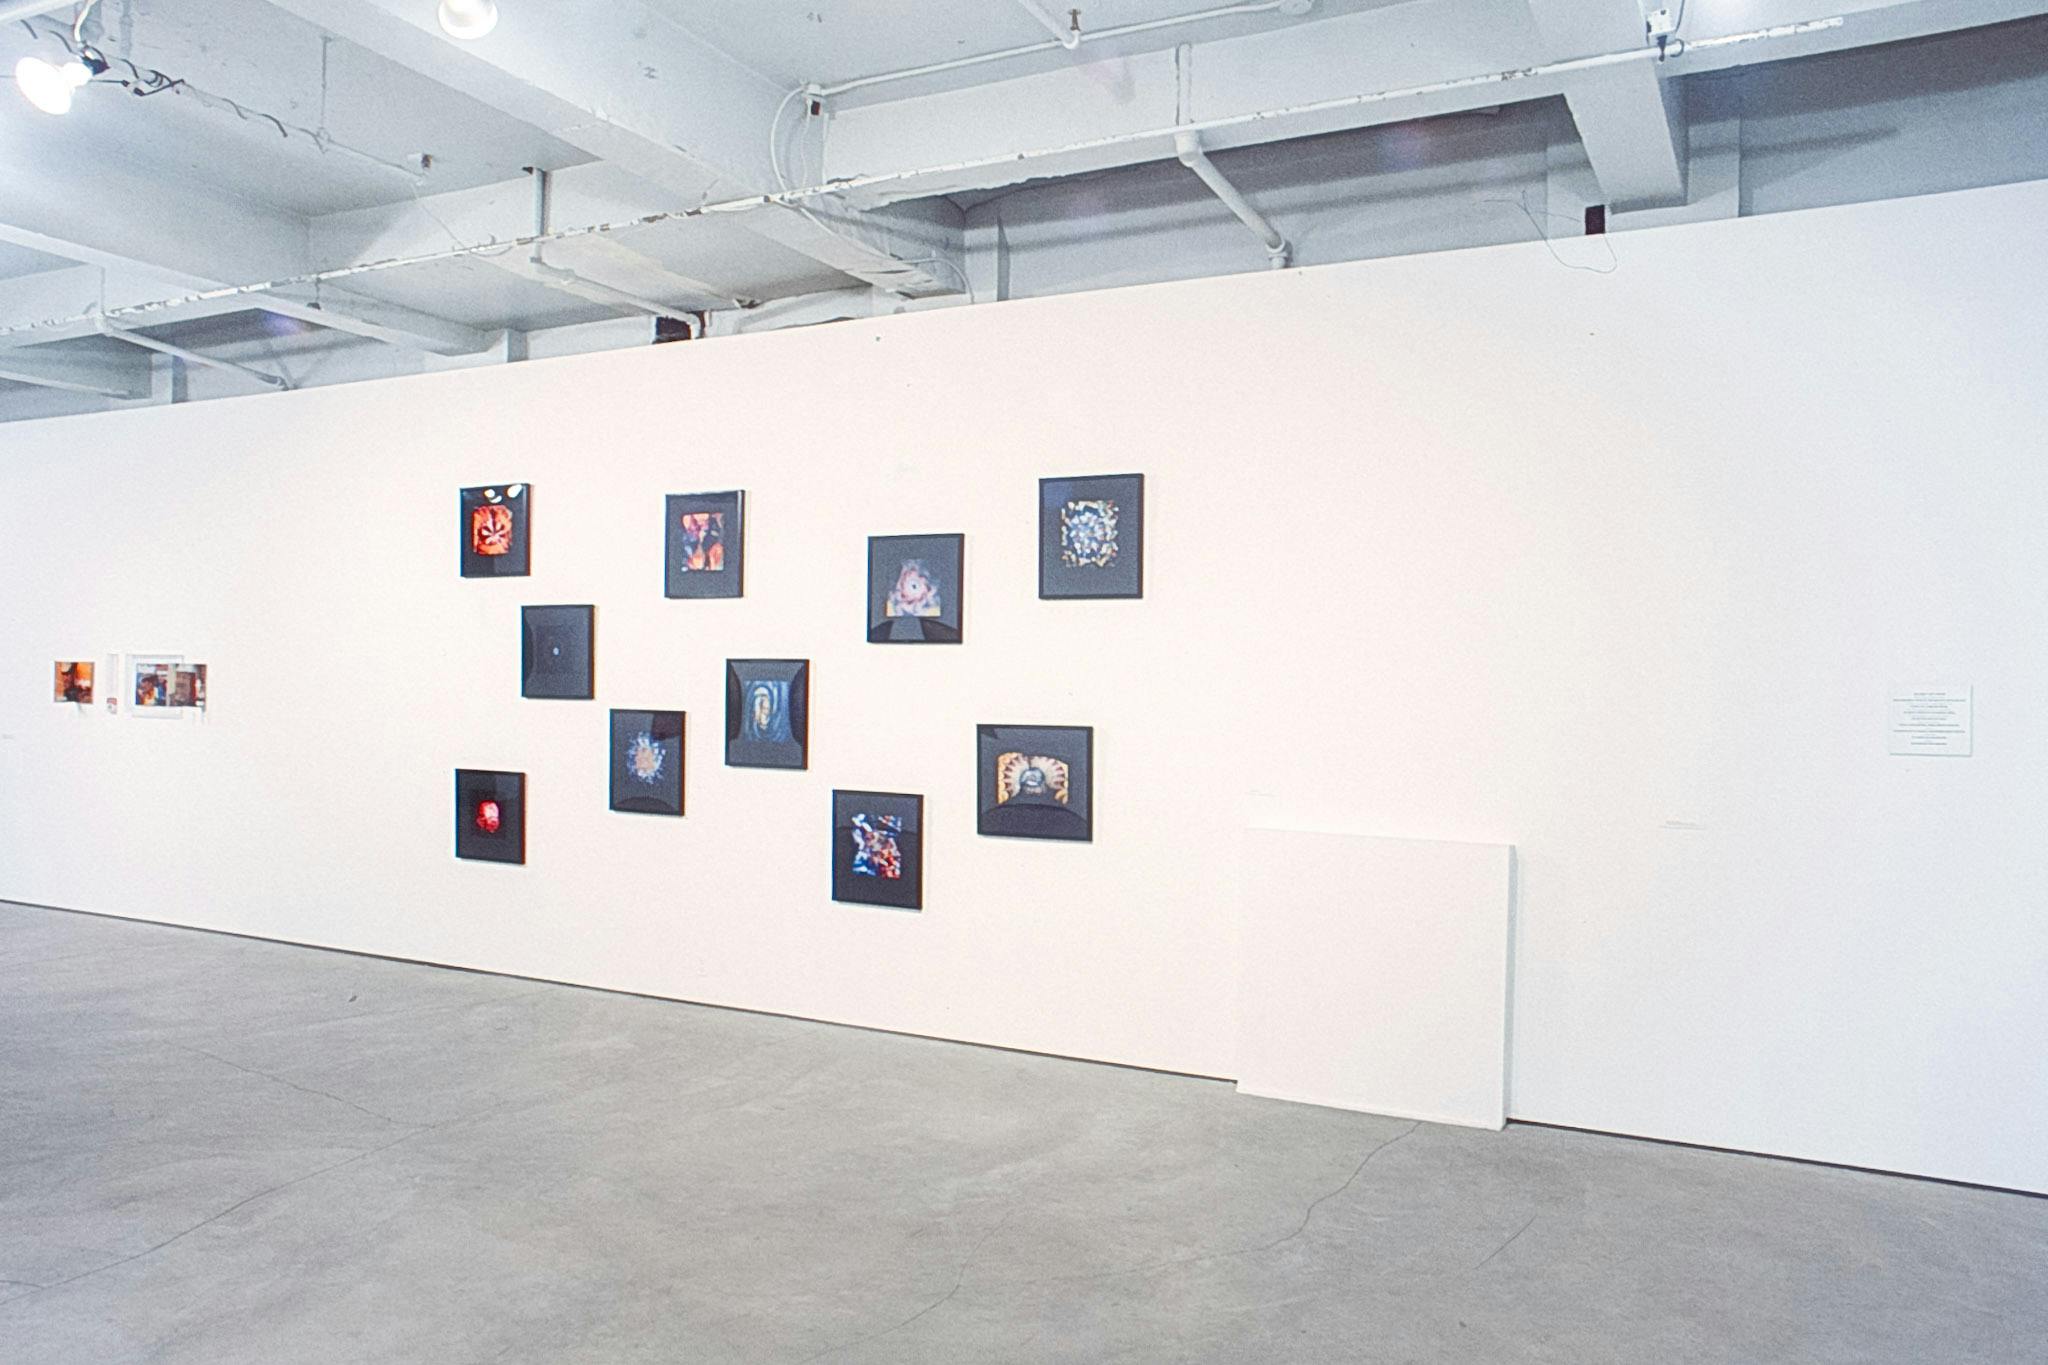 A white wall in a gallery, showing several images in black frames, mounted that resemble views from a kaleidoscope. In the corner, small digital collages are also mounted on the wall.